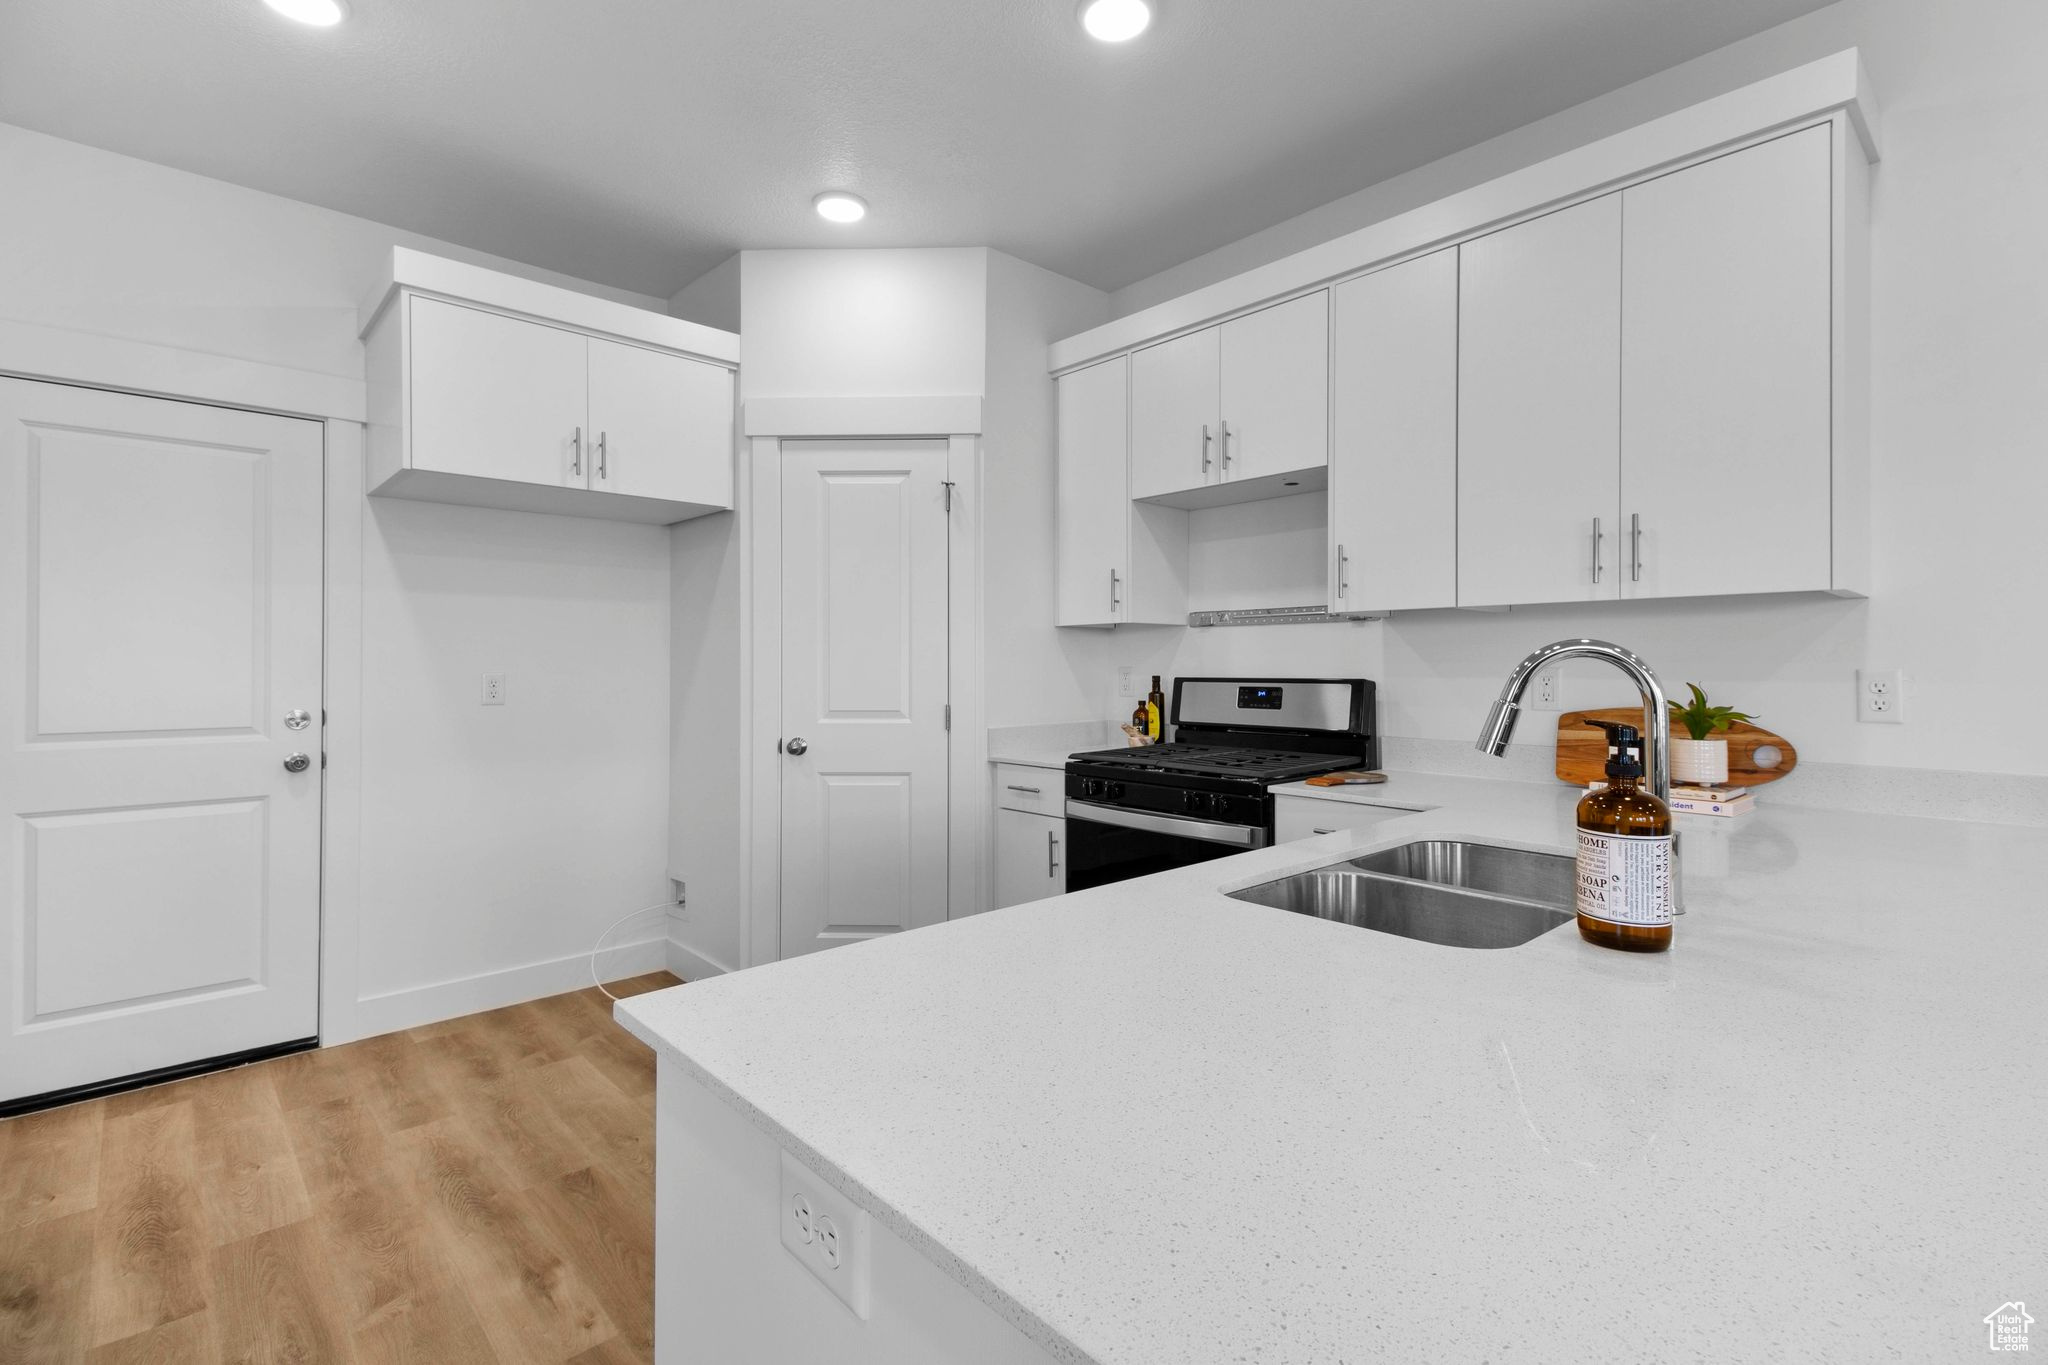 Kitchen with white cabinets, sink, light wood-type flooring, and stainless steel range with gas cooktop